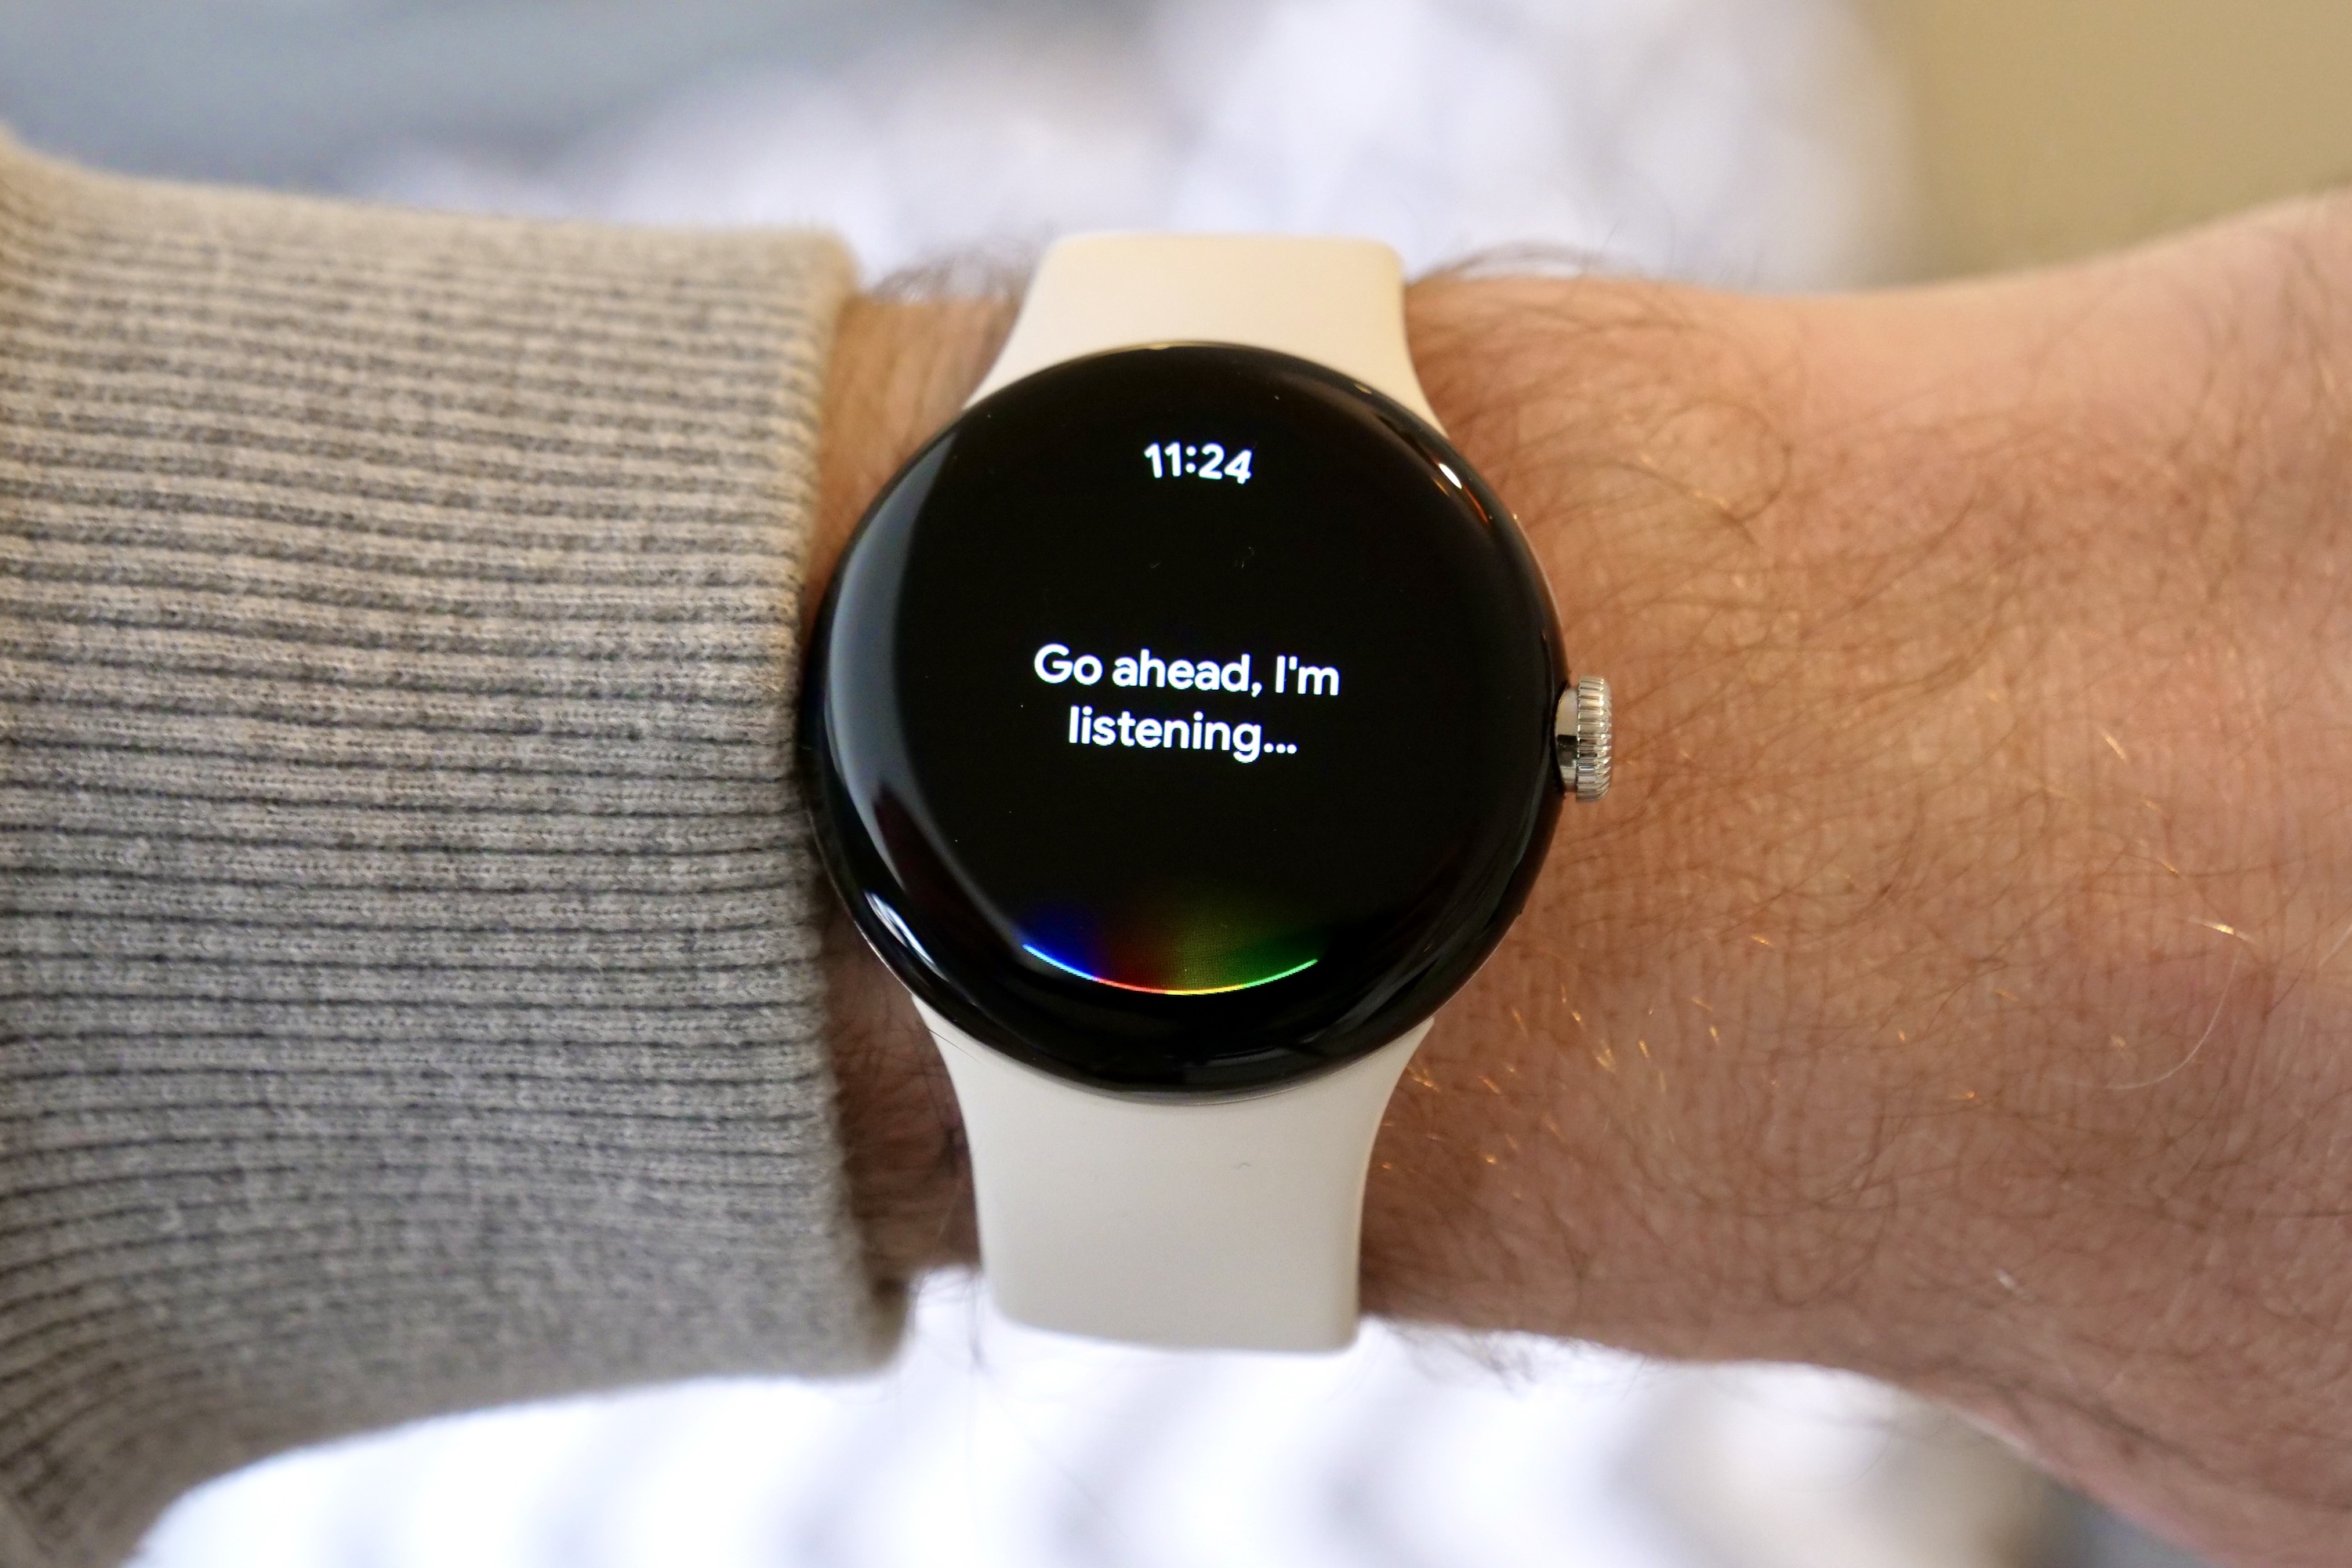 Google Assistant listening on the Google Pixel Watch.